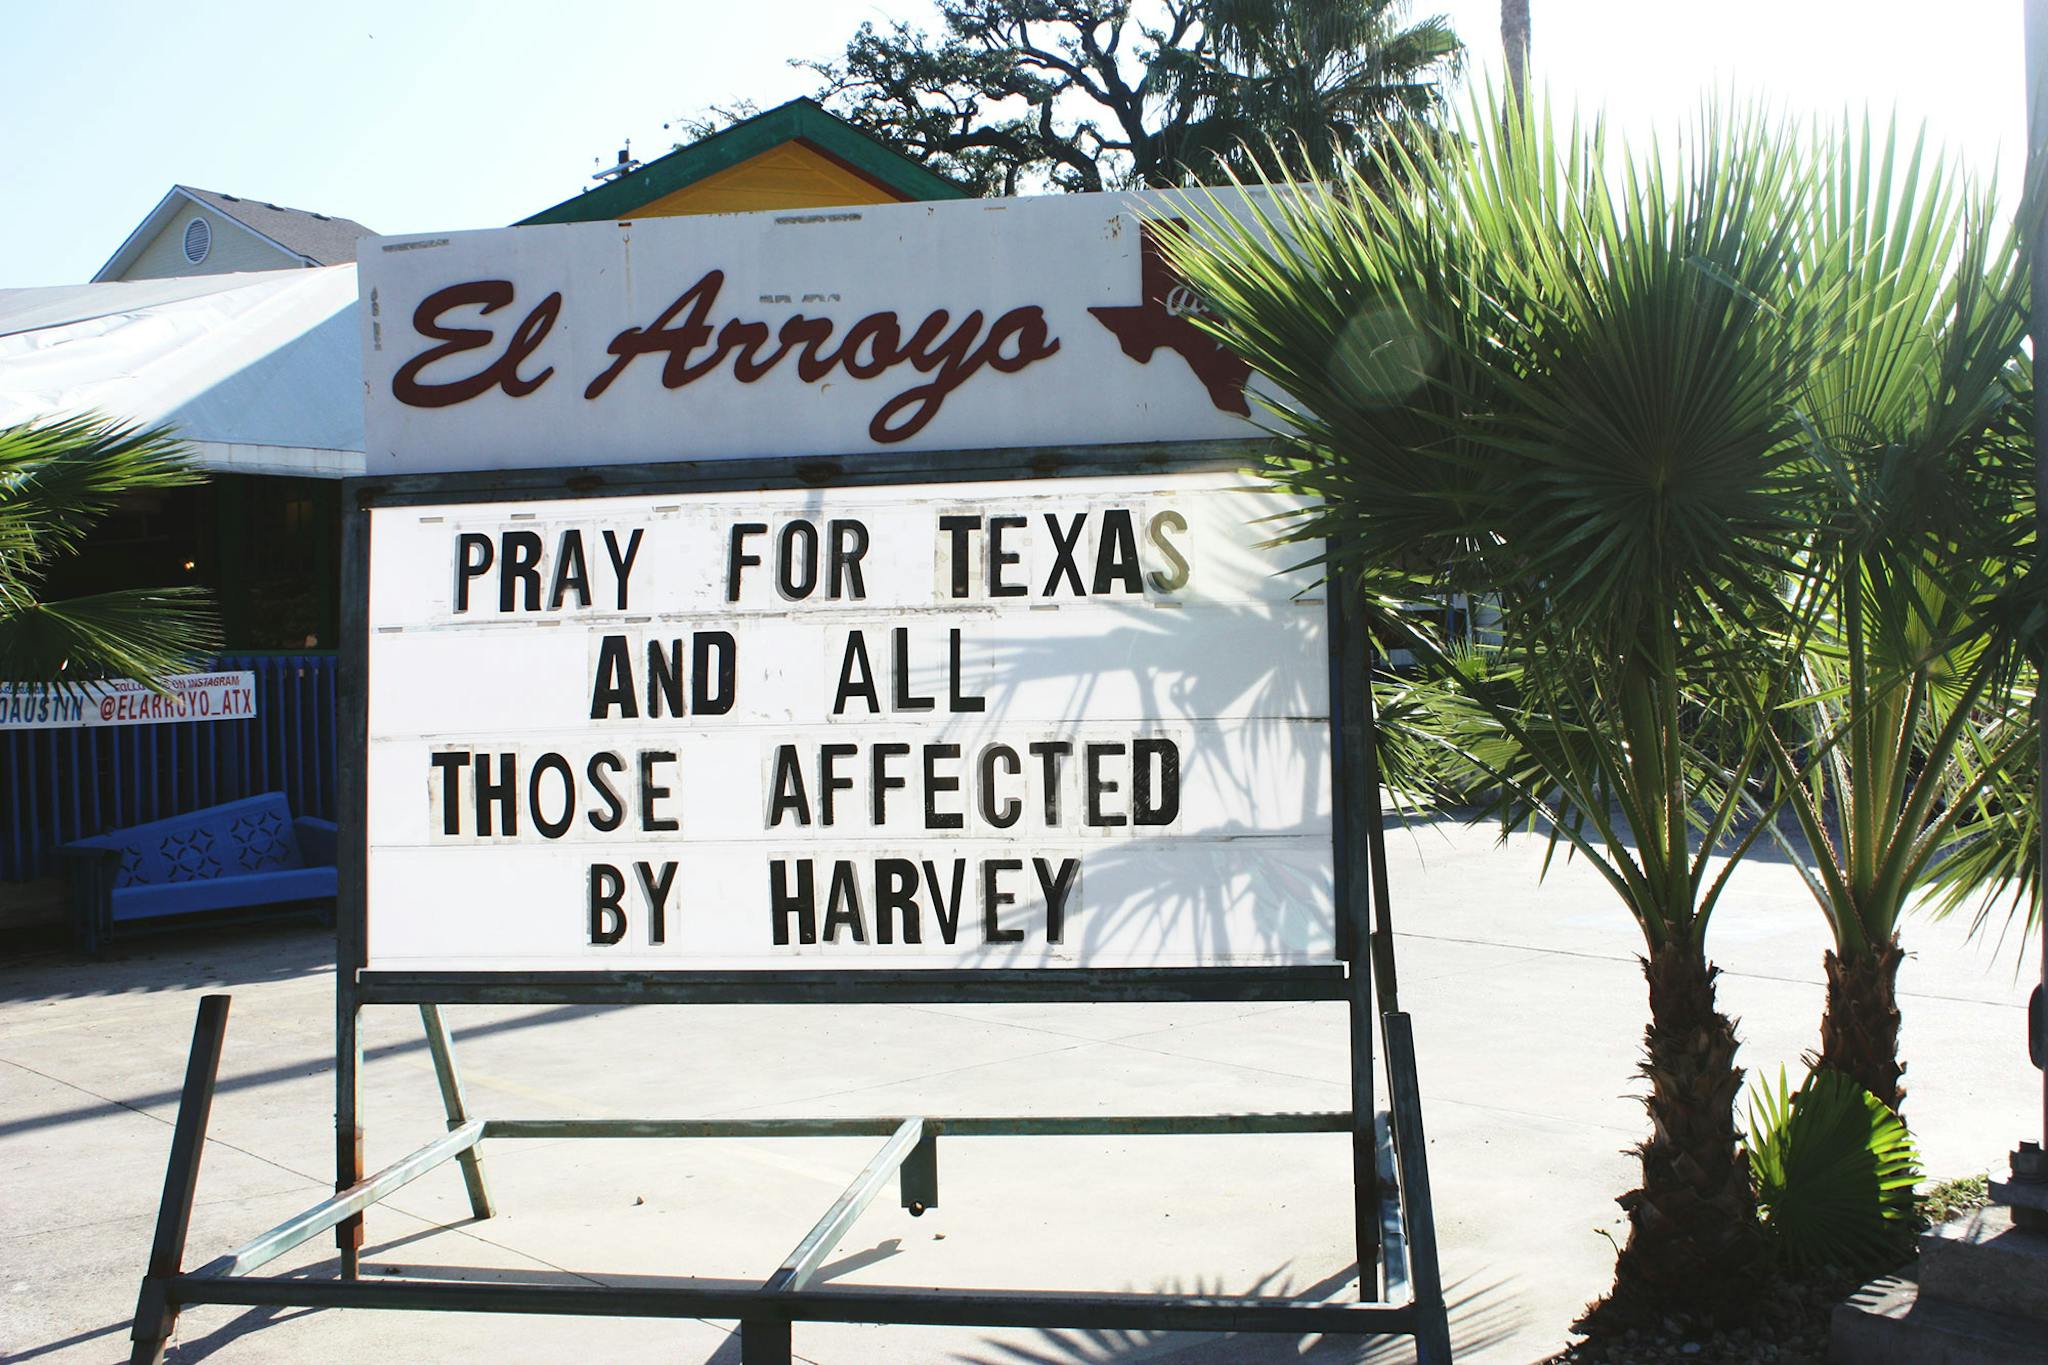 El Arroyo sign says pray for Texas and all those affected by Harvey.